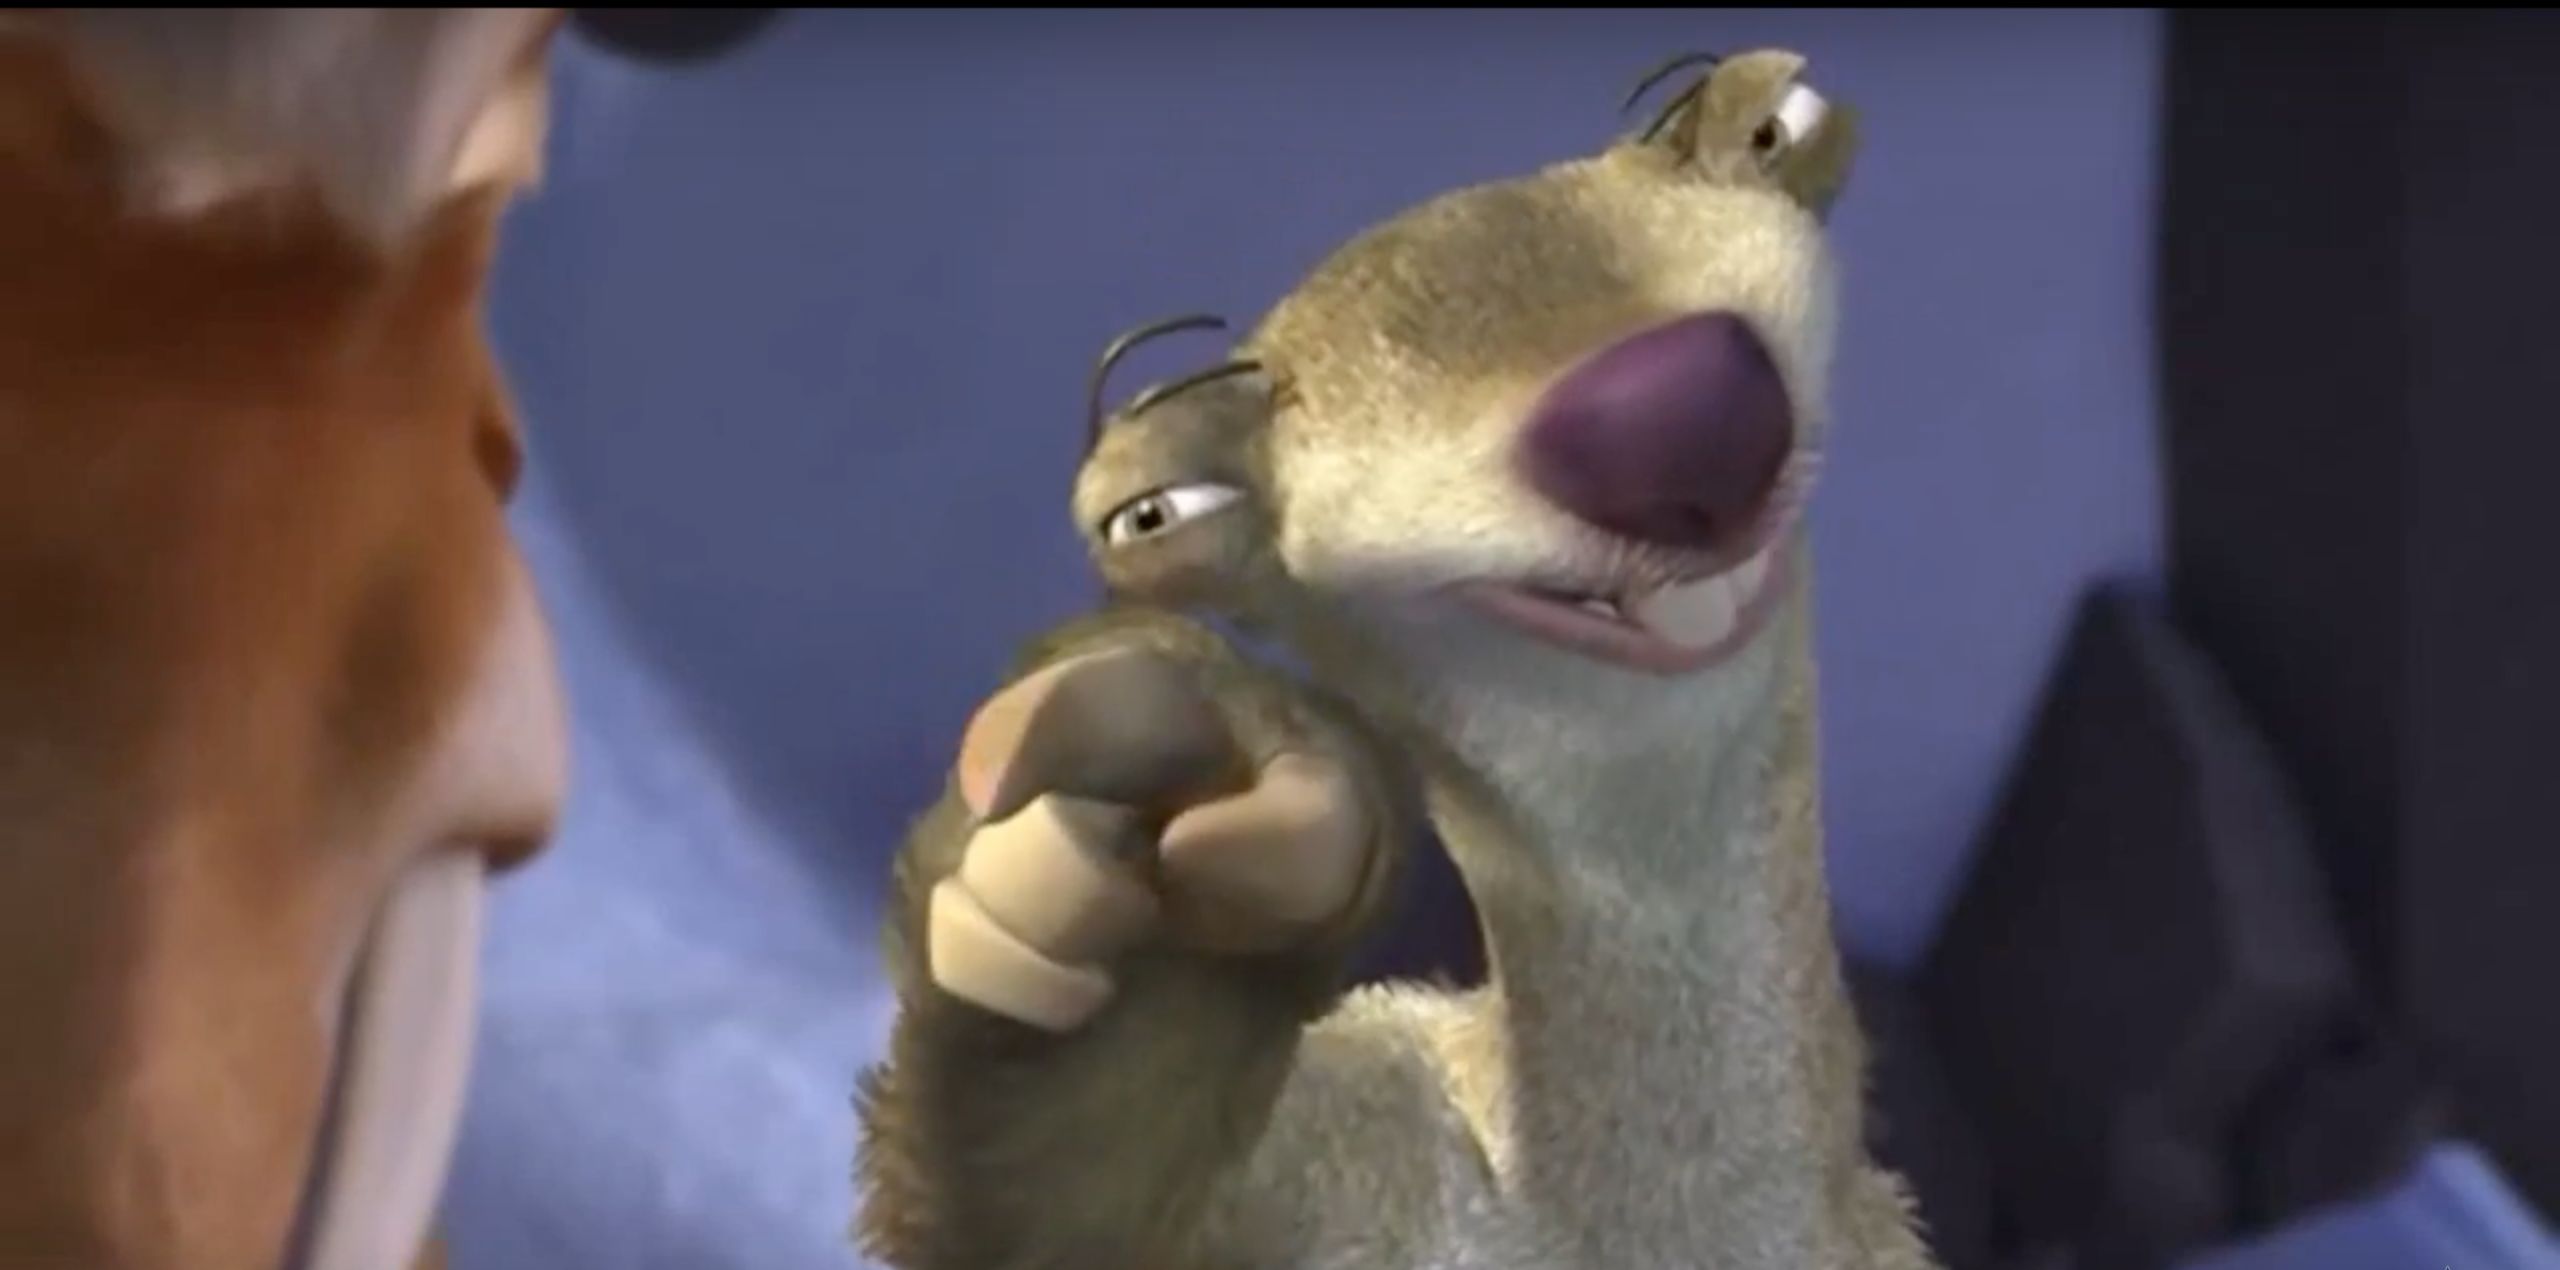 No "Sid Ice Age" memes have been featured yet. 